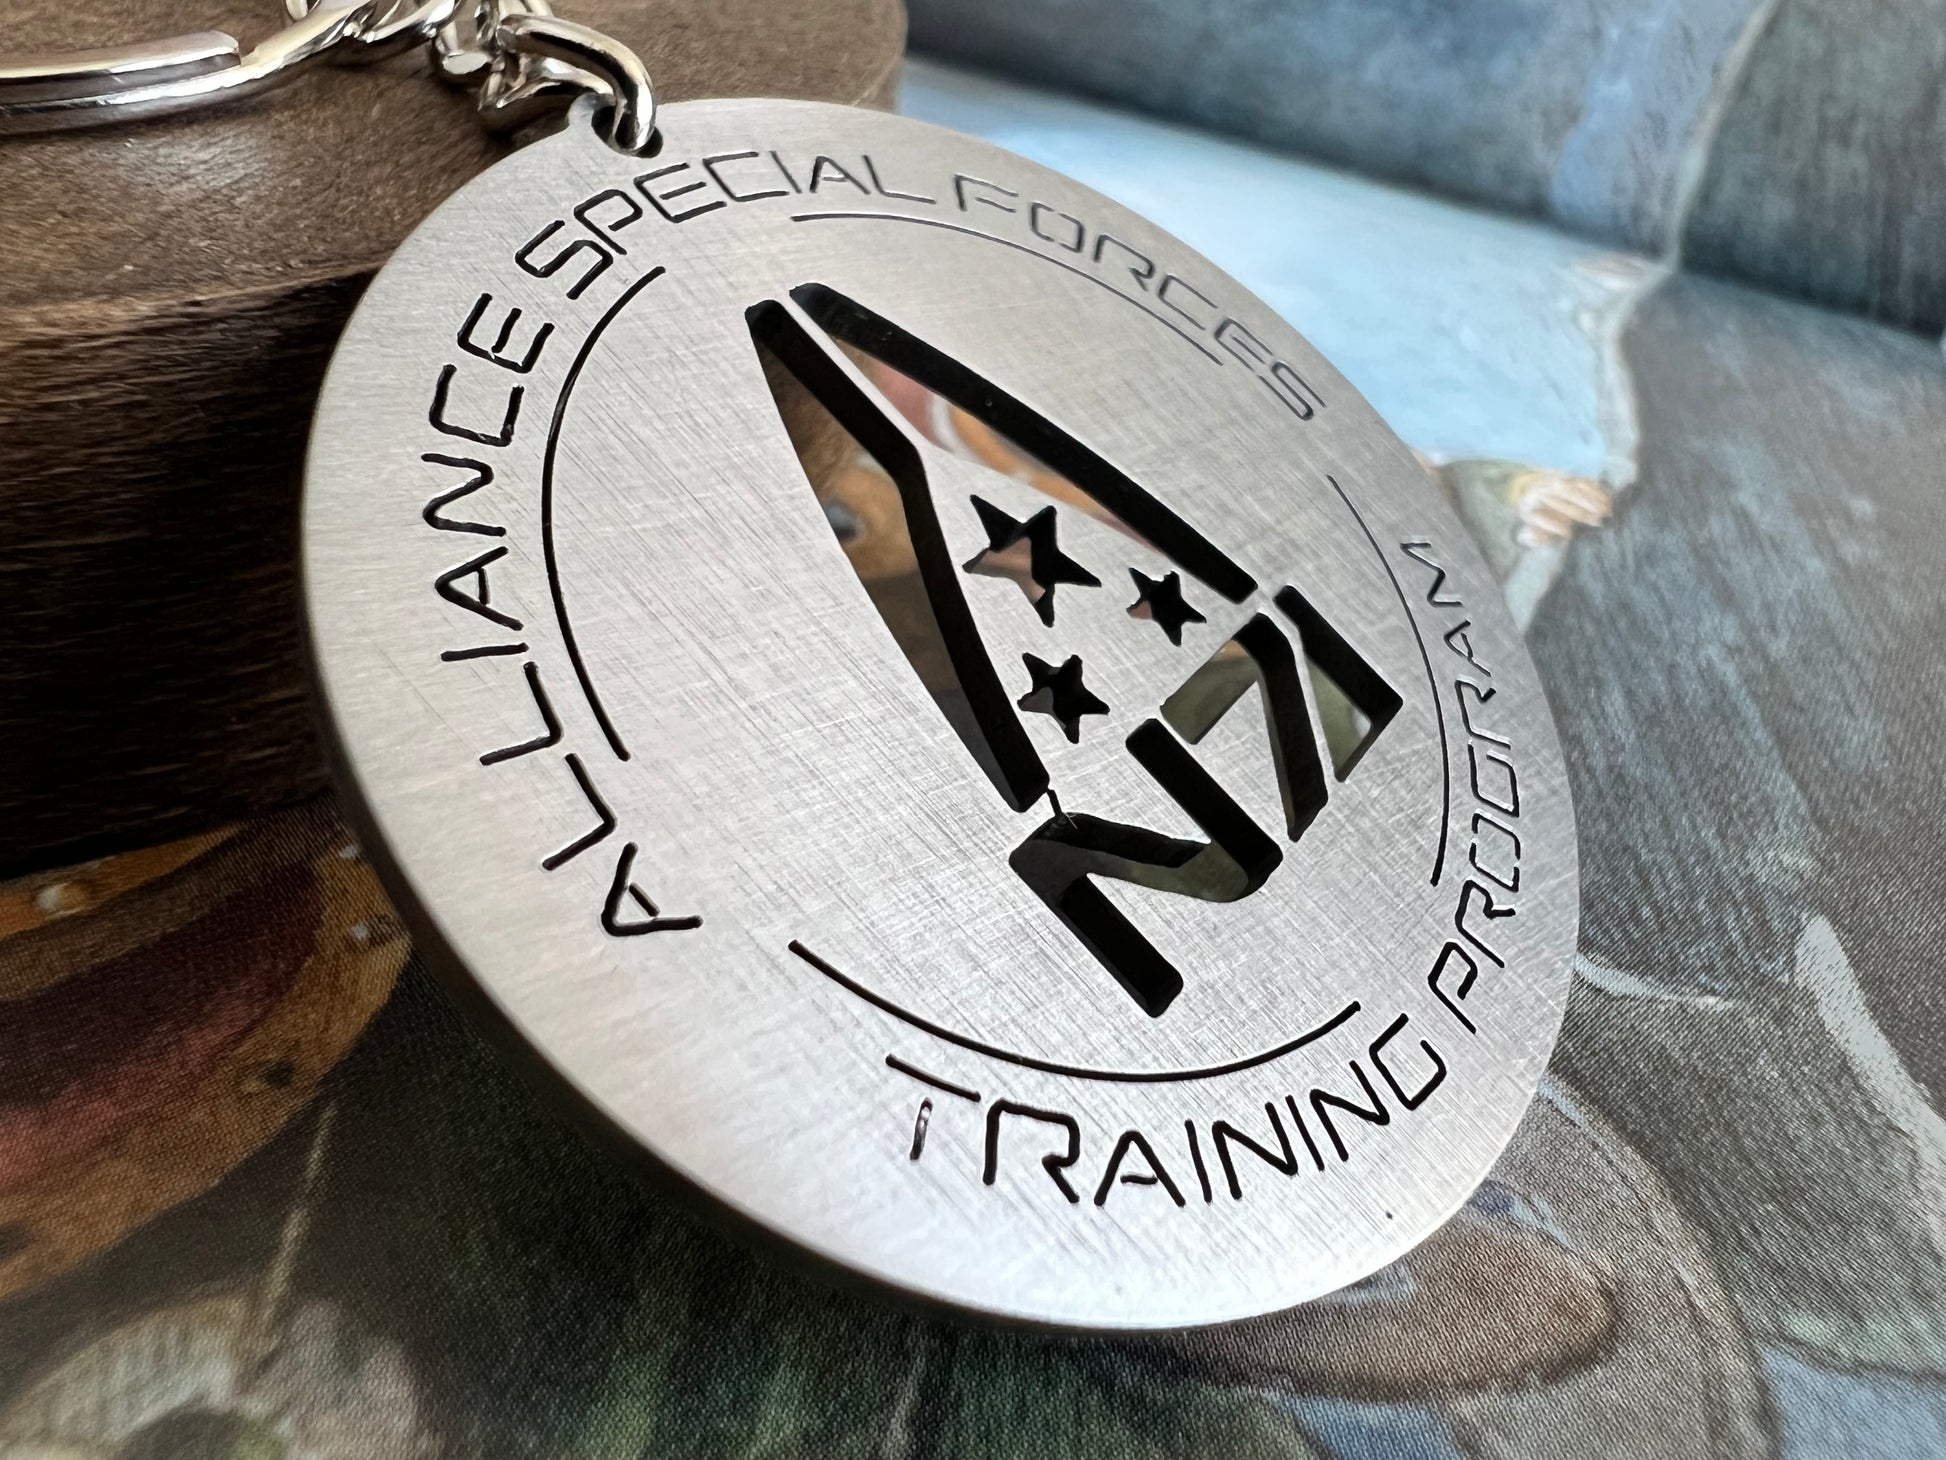 Mass Effect Alliance Special Force Training Program N7 Stainless Steel Keychain